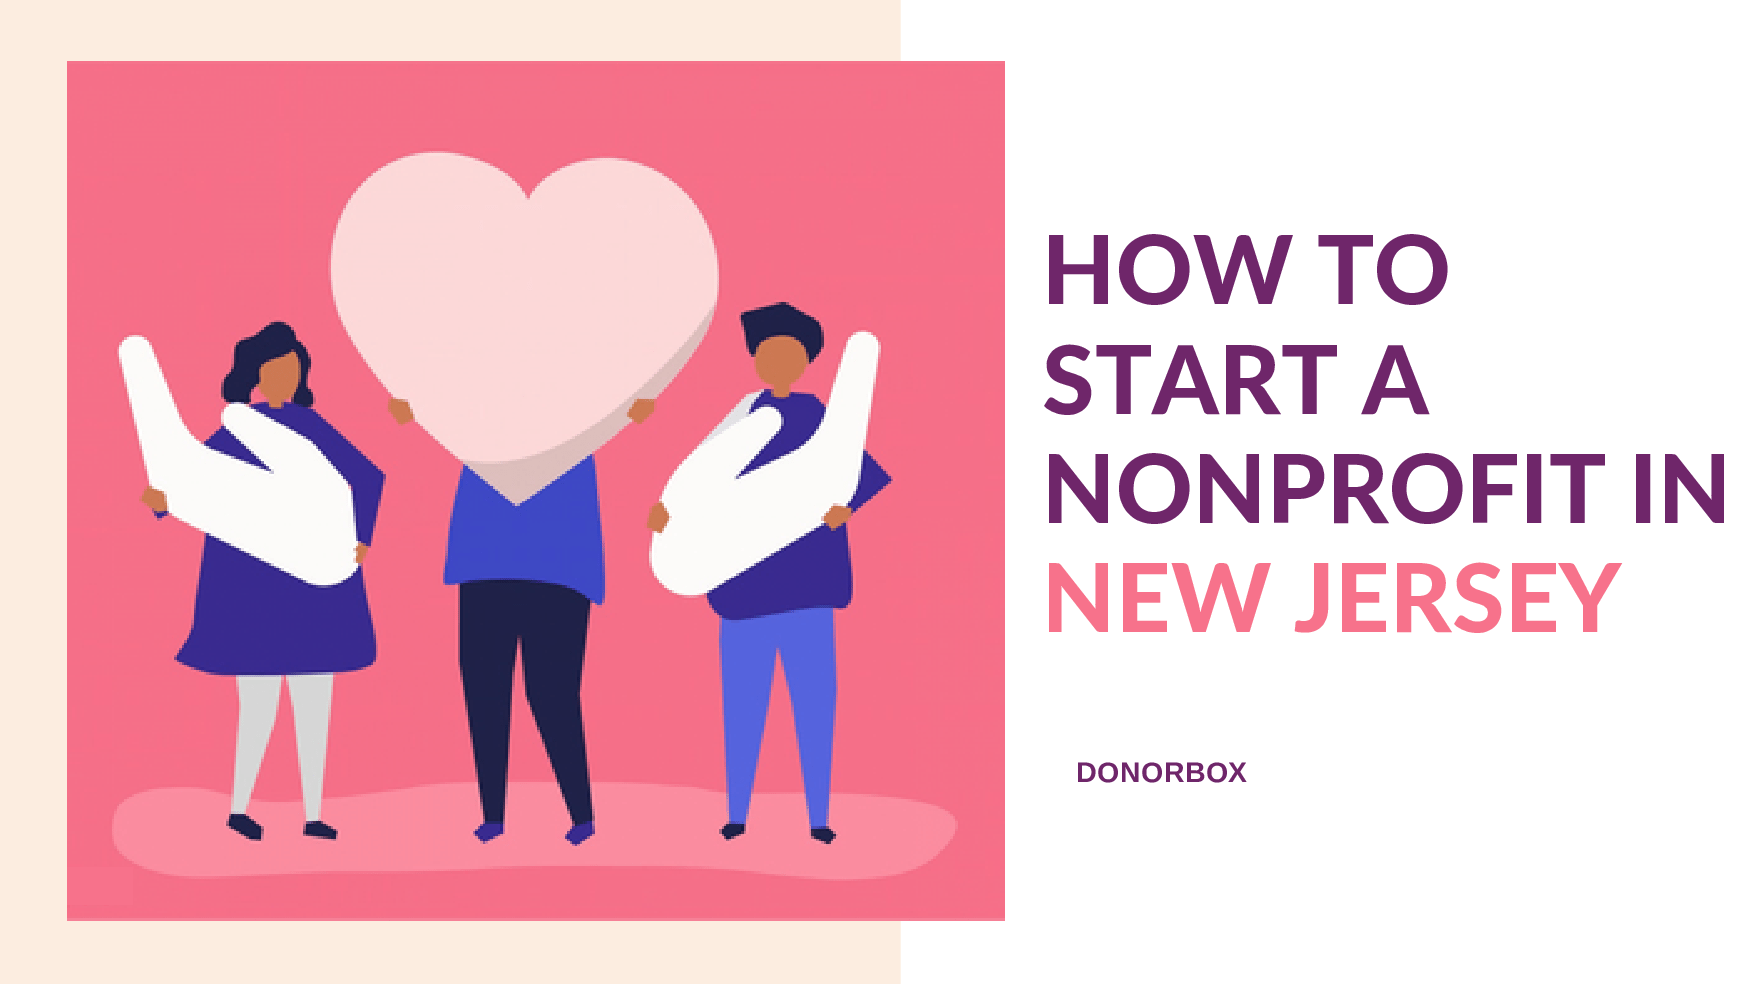 How to start a nonprofit in New Jersey